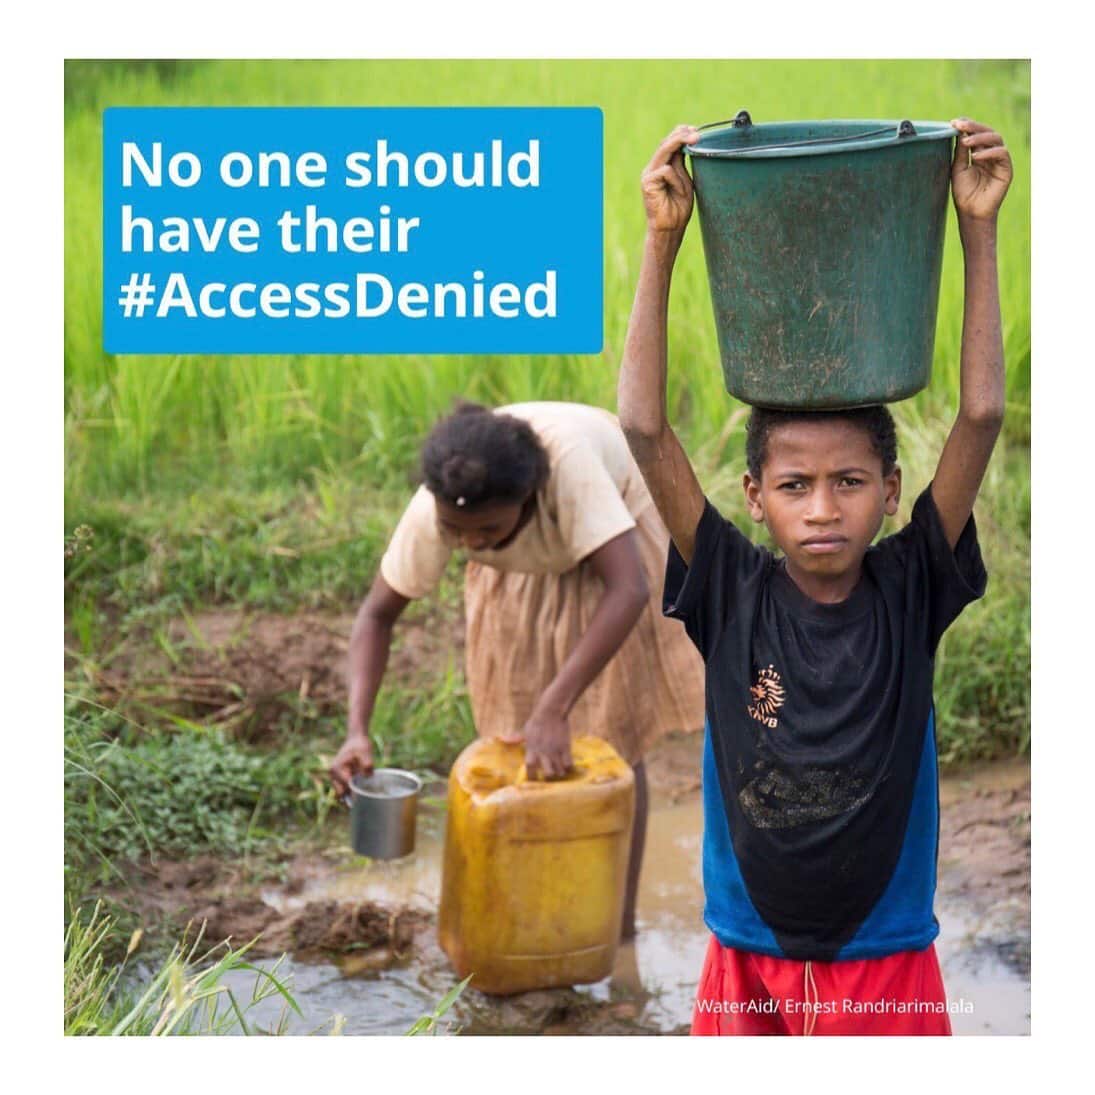 is a new @wateraid ambassador and is proud to support their appeal 
.
.
.